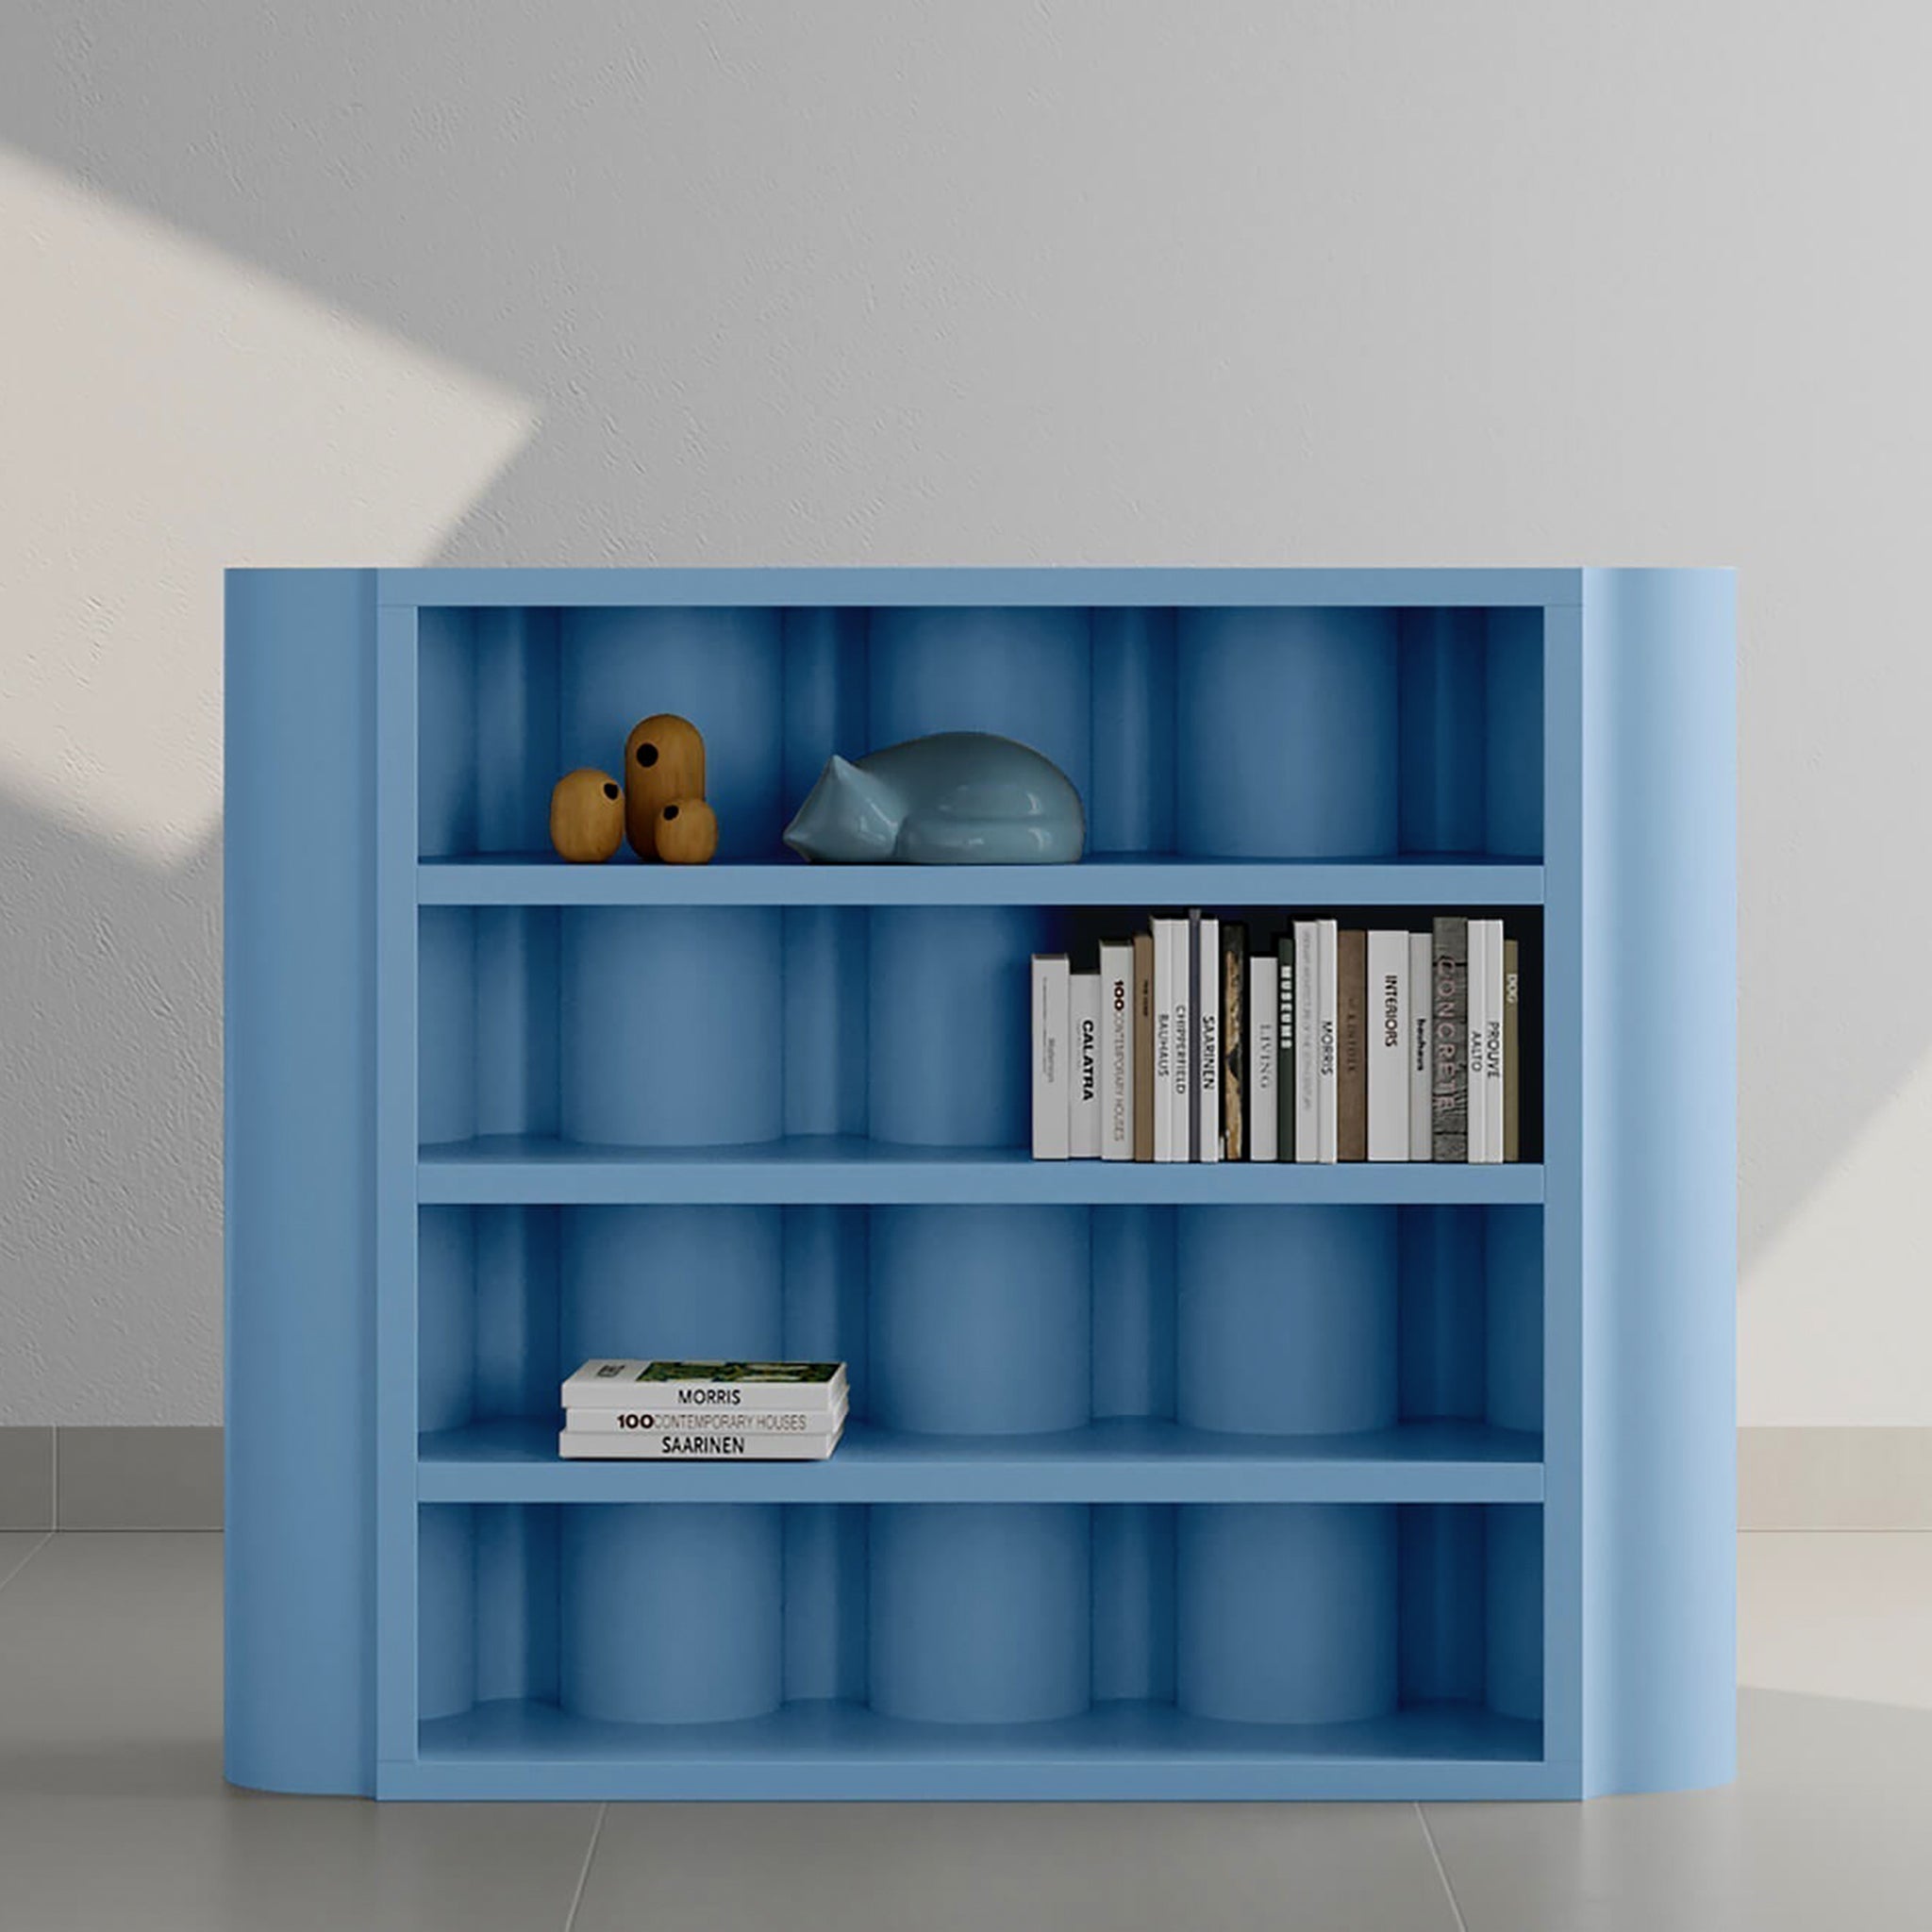 A modern blue bookcase with curved edges, displaying a collection of books and decorative items, including a small sculpture and a ceramic cat figure.